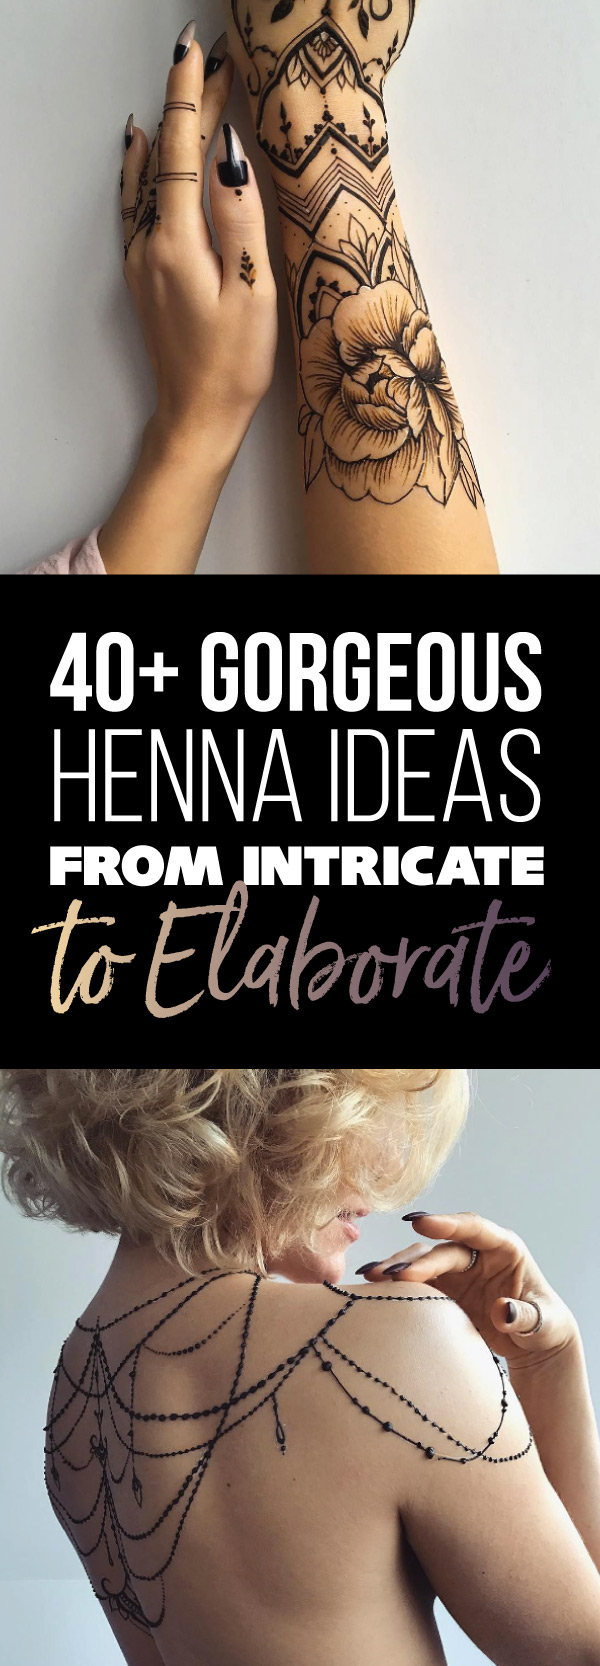 40+ Gorgeous Henna Ideas from Intricate to Elaborate